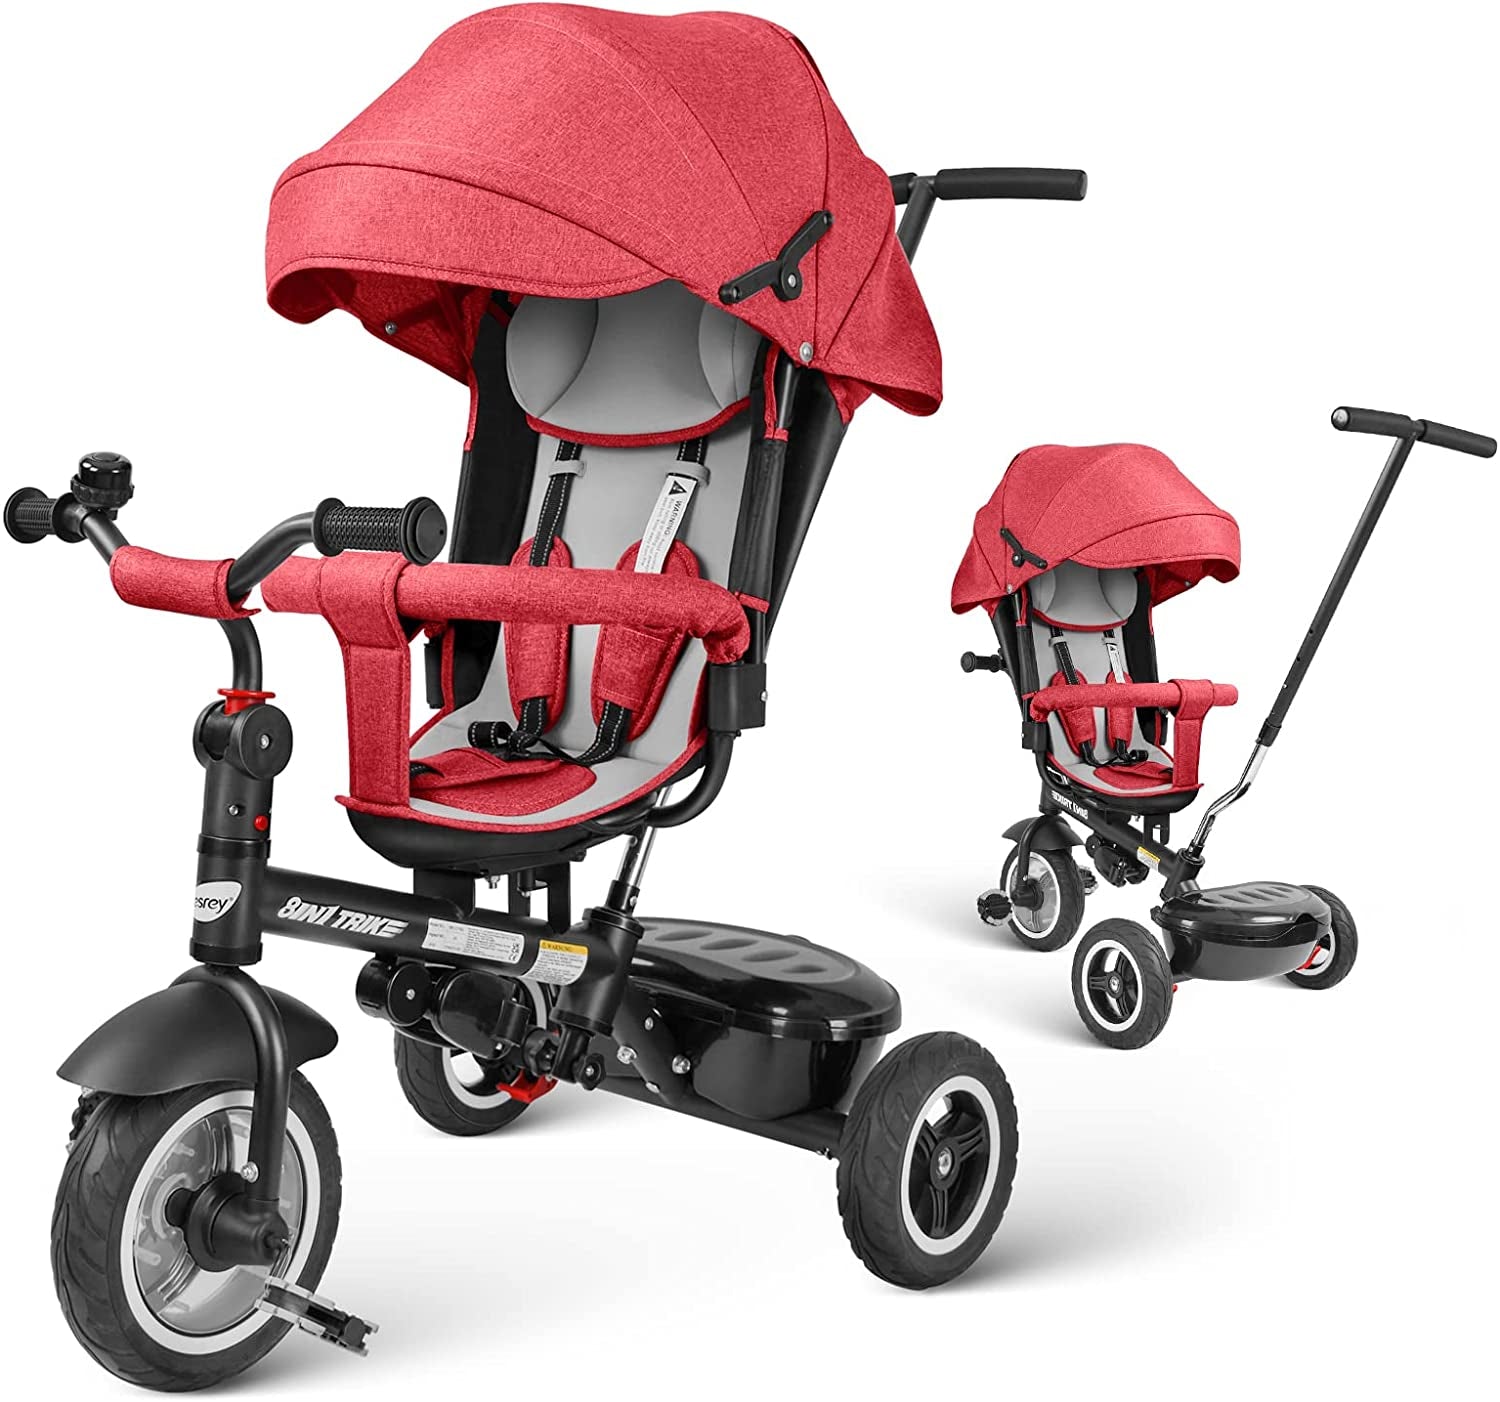 Kids Tricycle, Baby Trike, 8-In-1 Kids Stroller Tricycle with Adjustable Push Handle, All Terrain Rubber Wheel, Reversible Seat(Red)